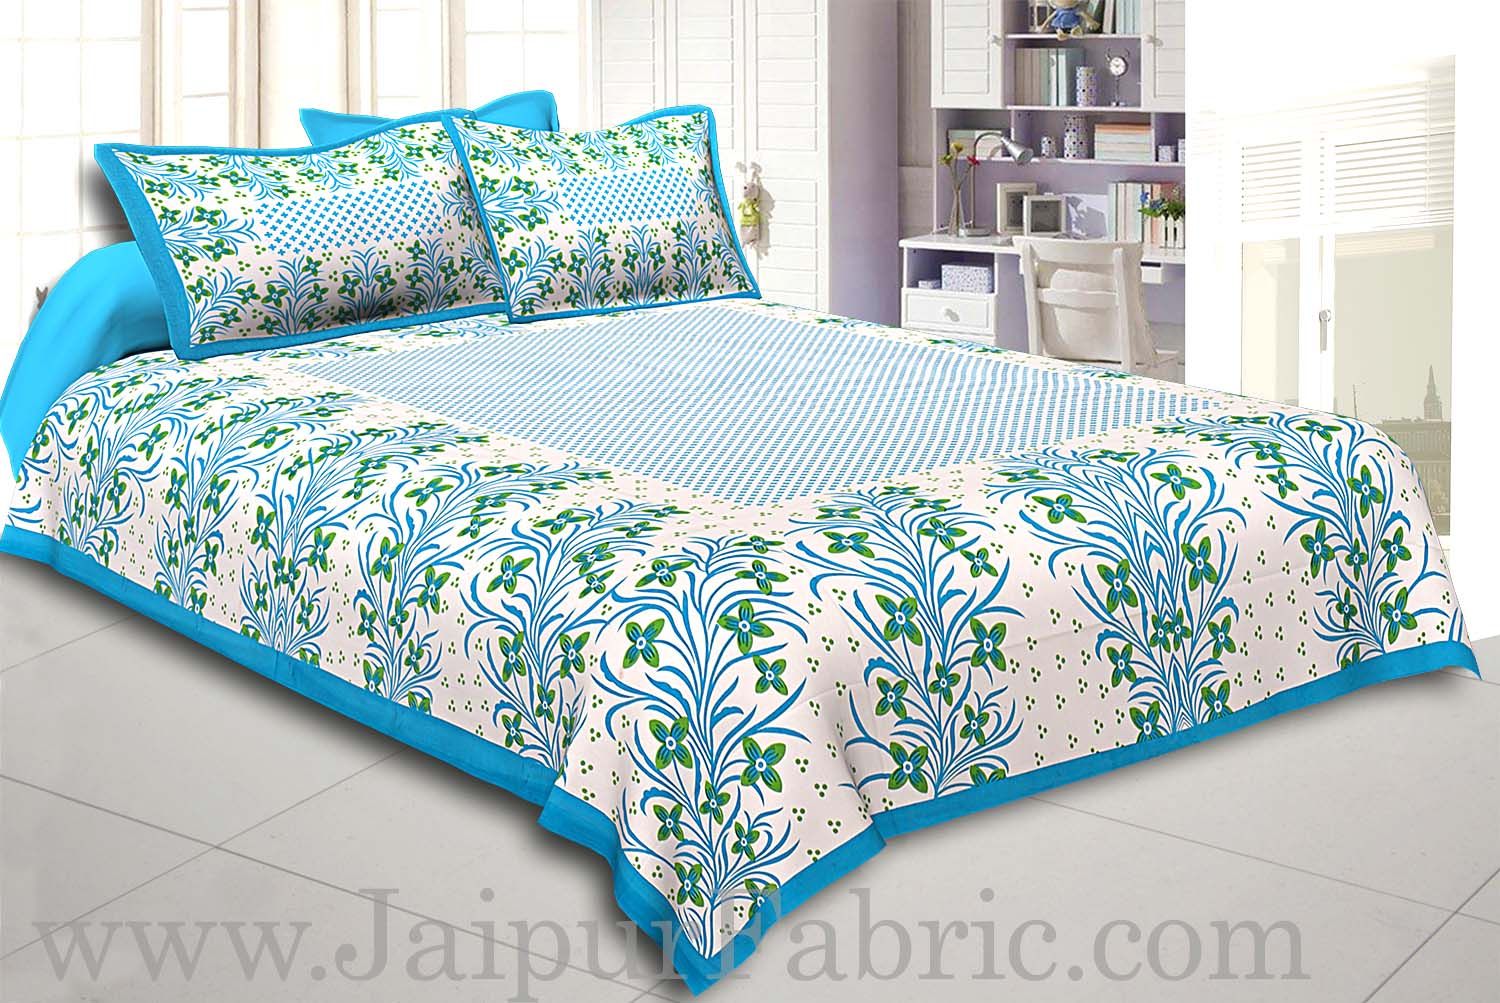 COMBO103 Beautiful Multicolor 4 Bedsheet + 8 Pillow Cover